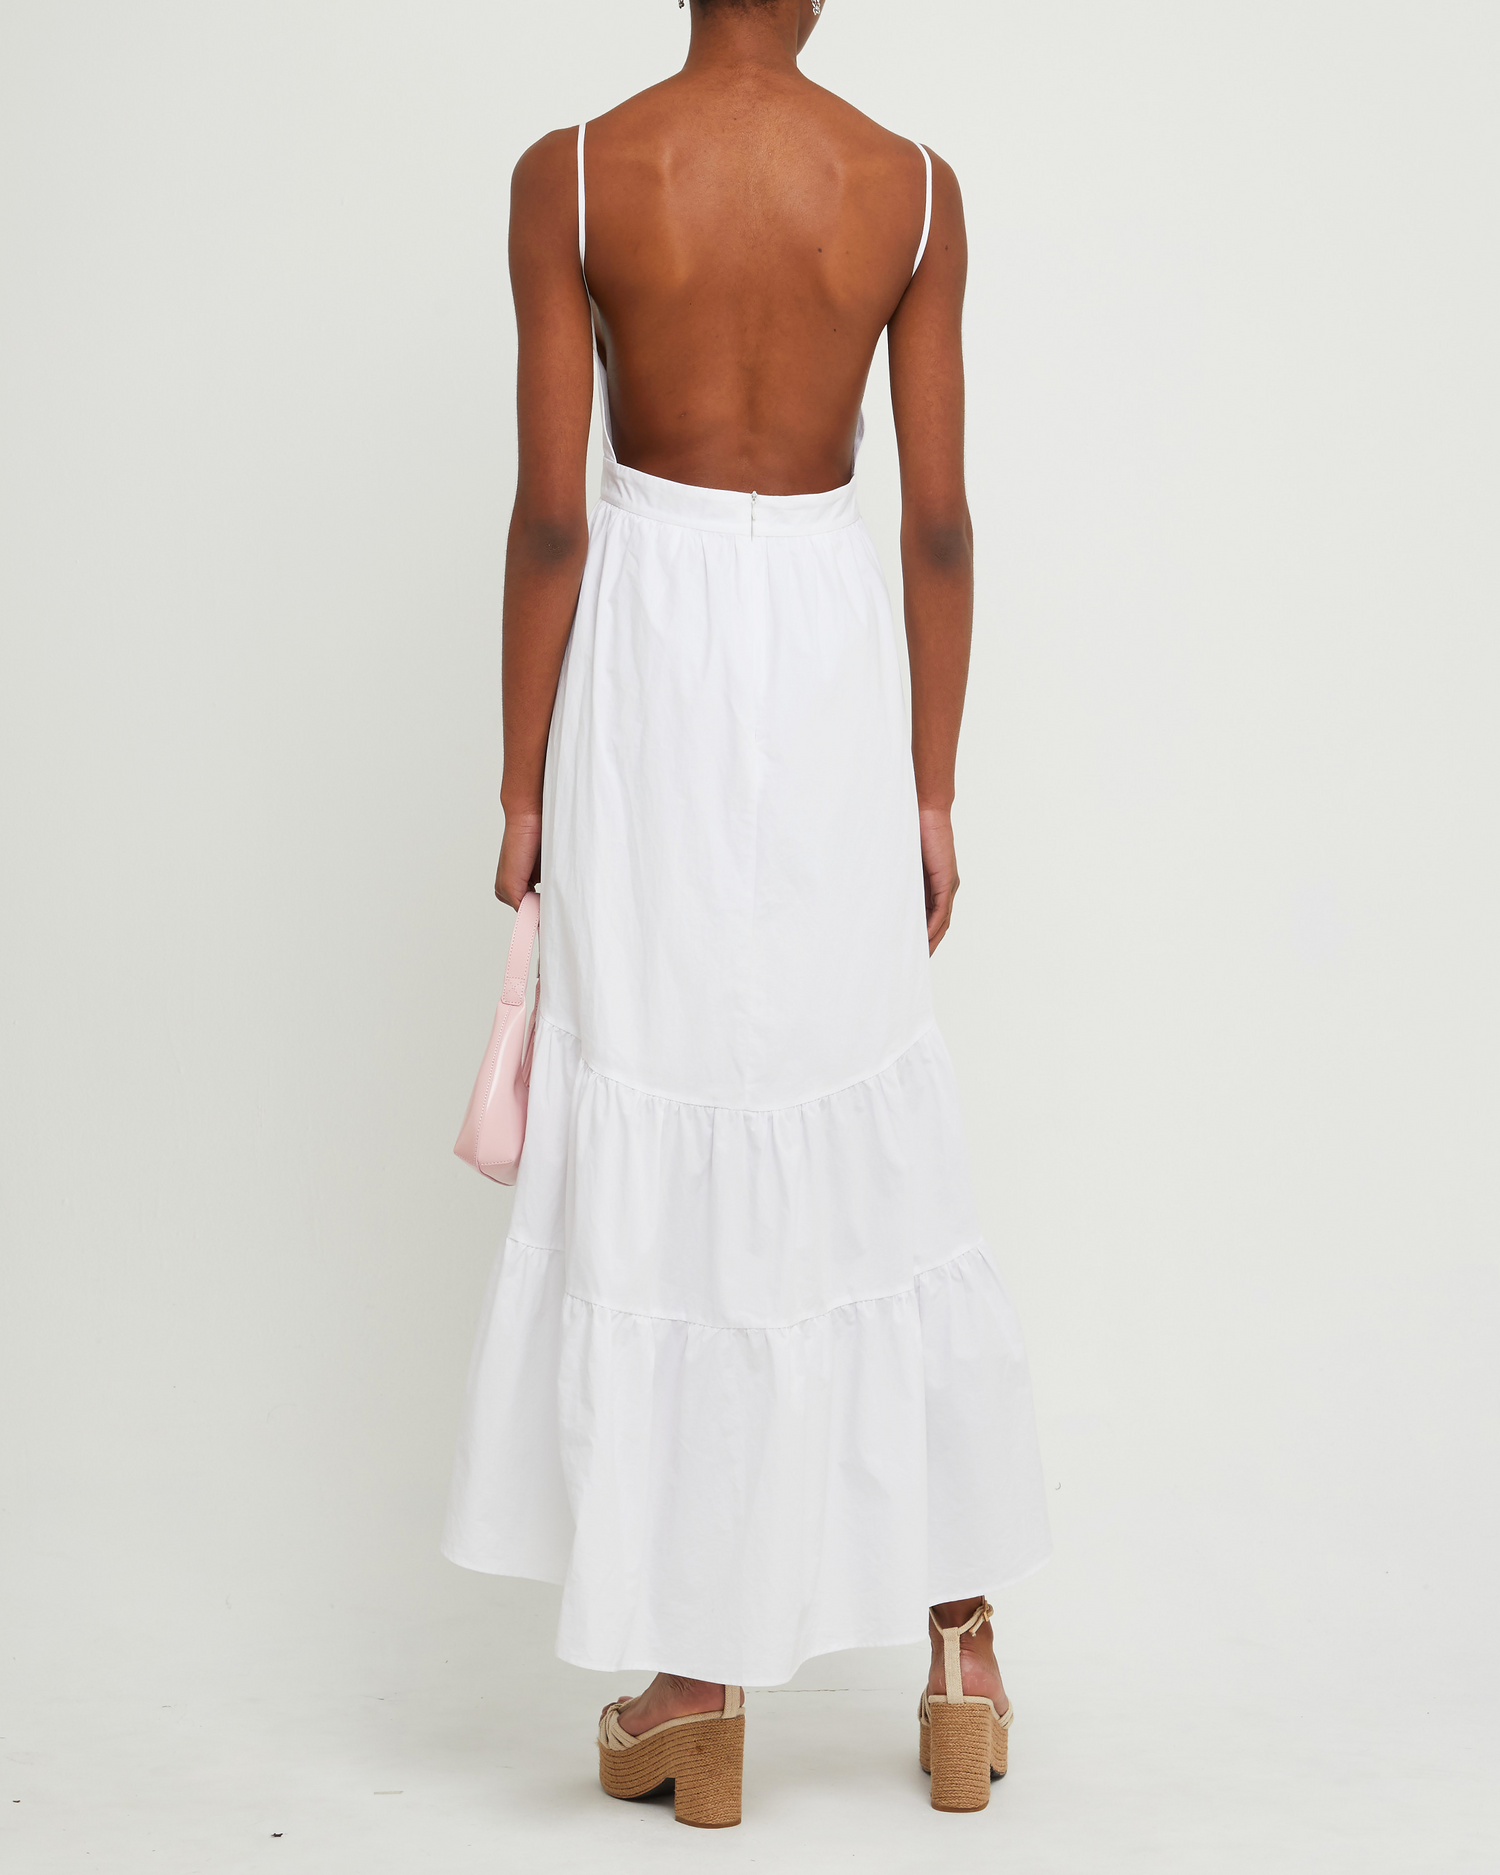 Second image of Dionne Cotton Dress, a white midi dress, spaghetti straps, high-low, high low skirt, maxi